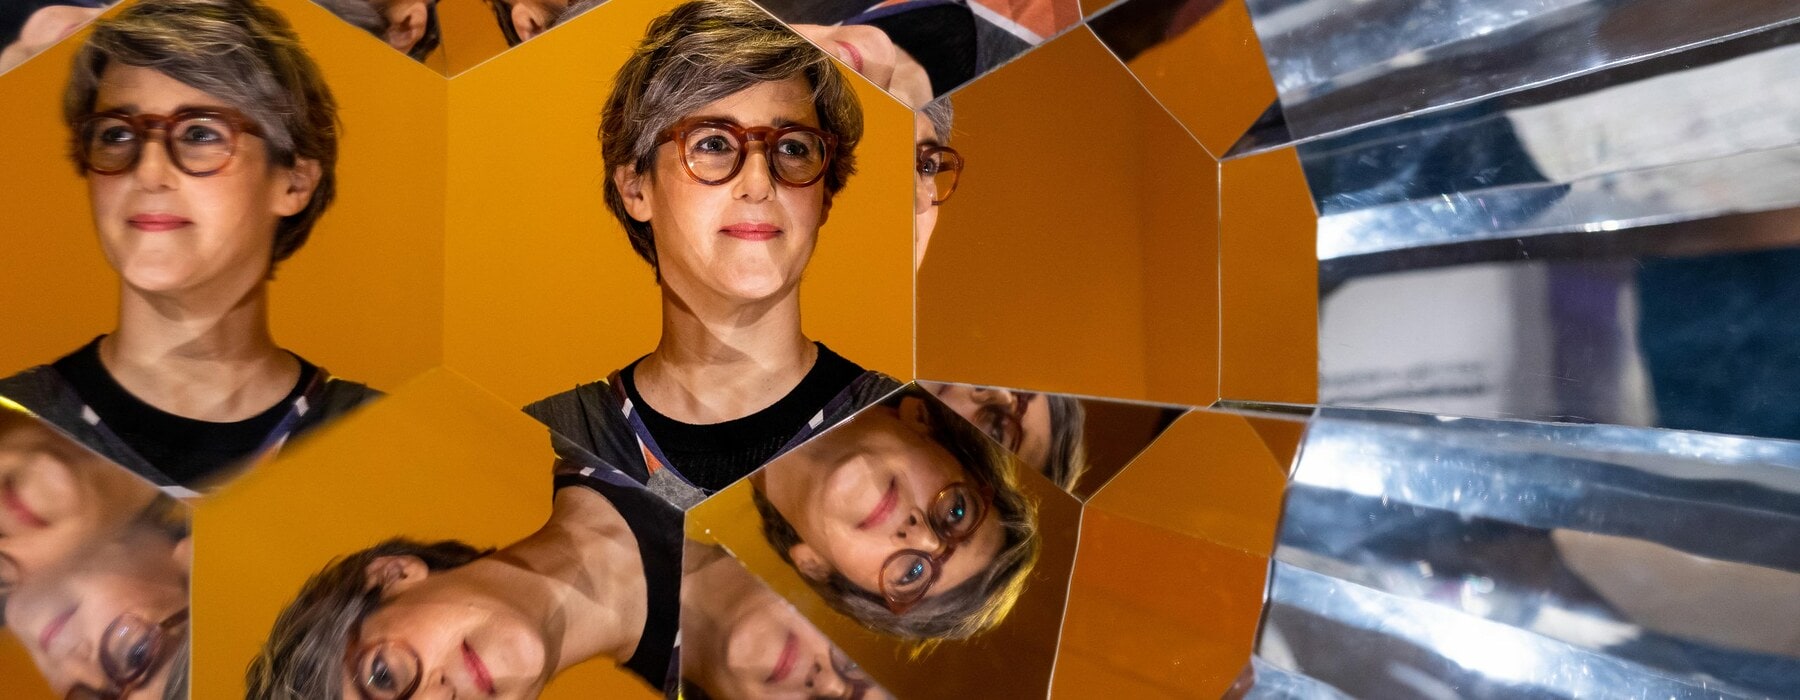 Kaleidoscope reflections of Lizzie Bisley wearing glasses and a black top